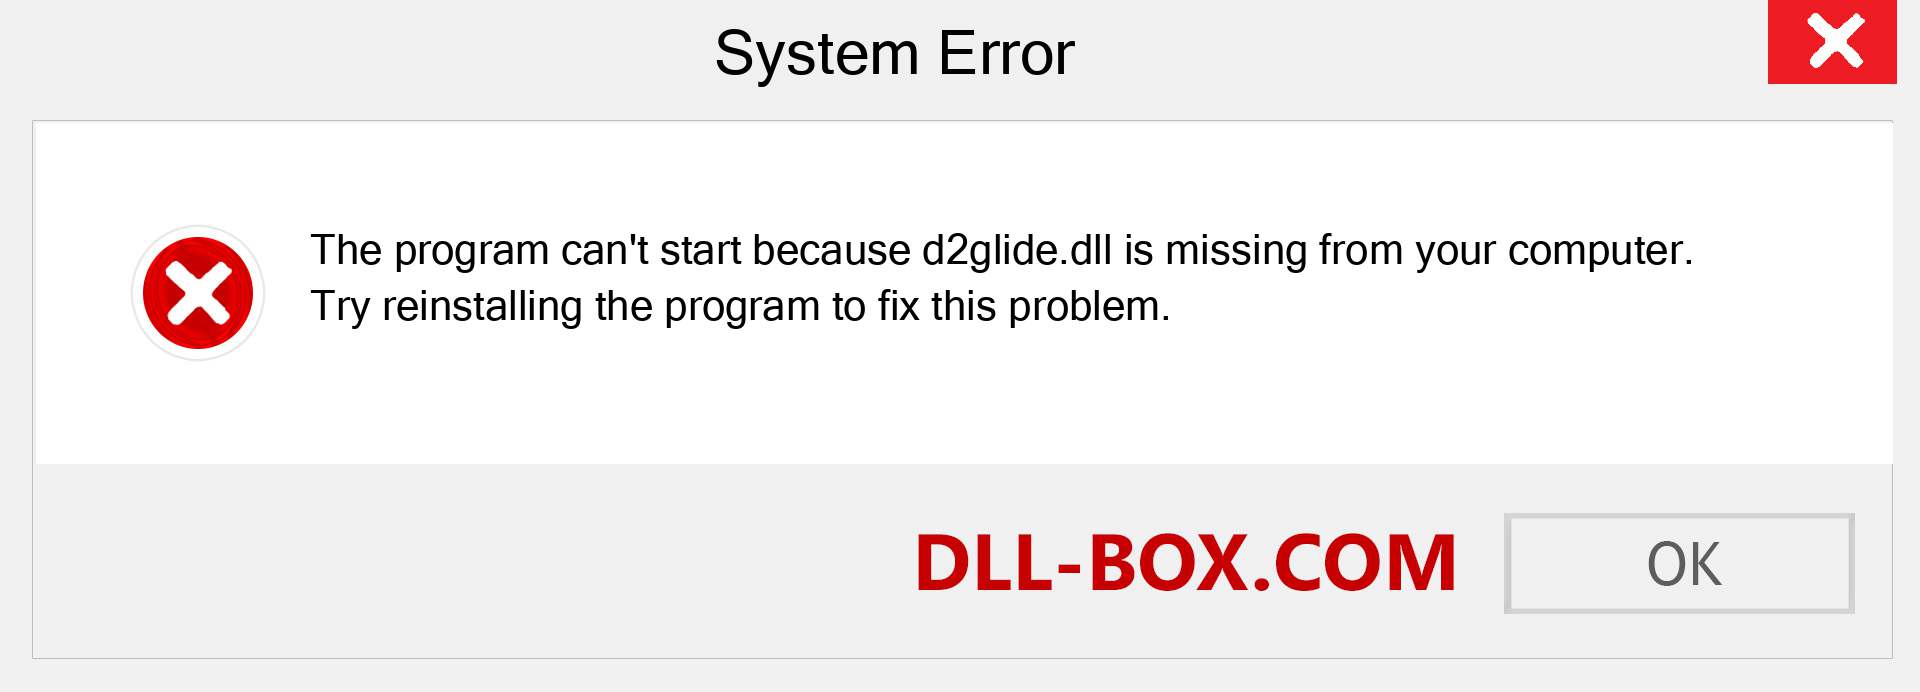  d2glide.dll file is missing?. Download for Windows 7, 8, 10 - Fix  d2glide dll Missing Error on Windows, photos, images